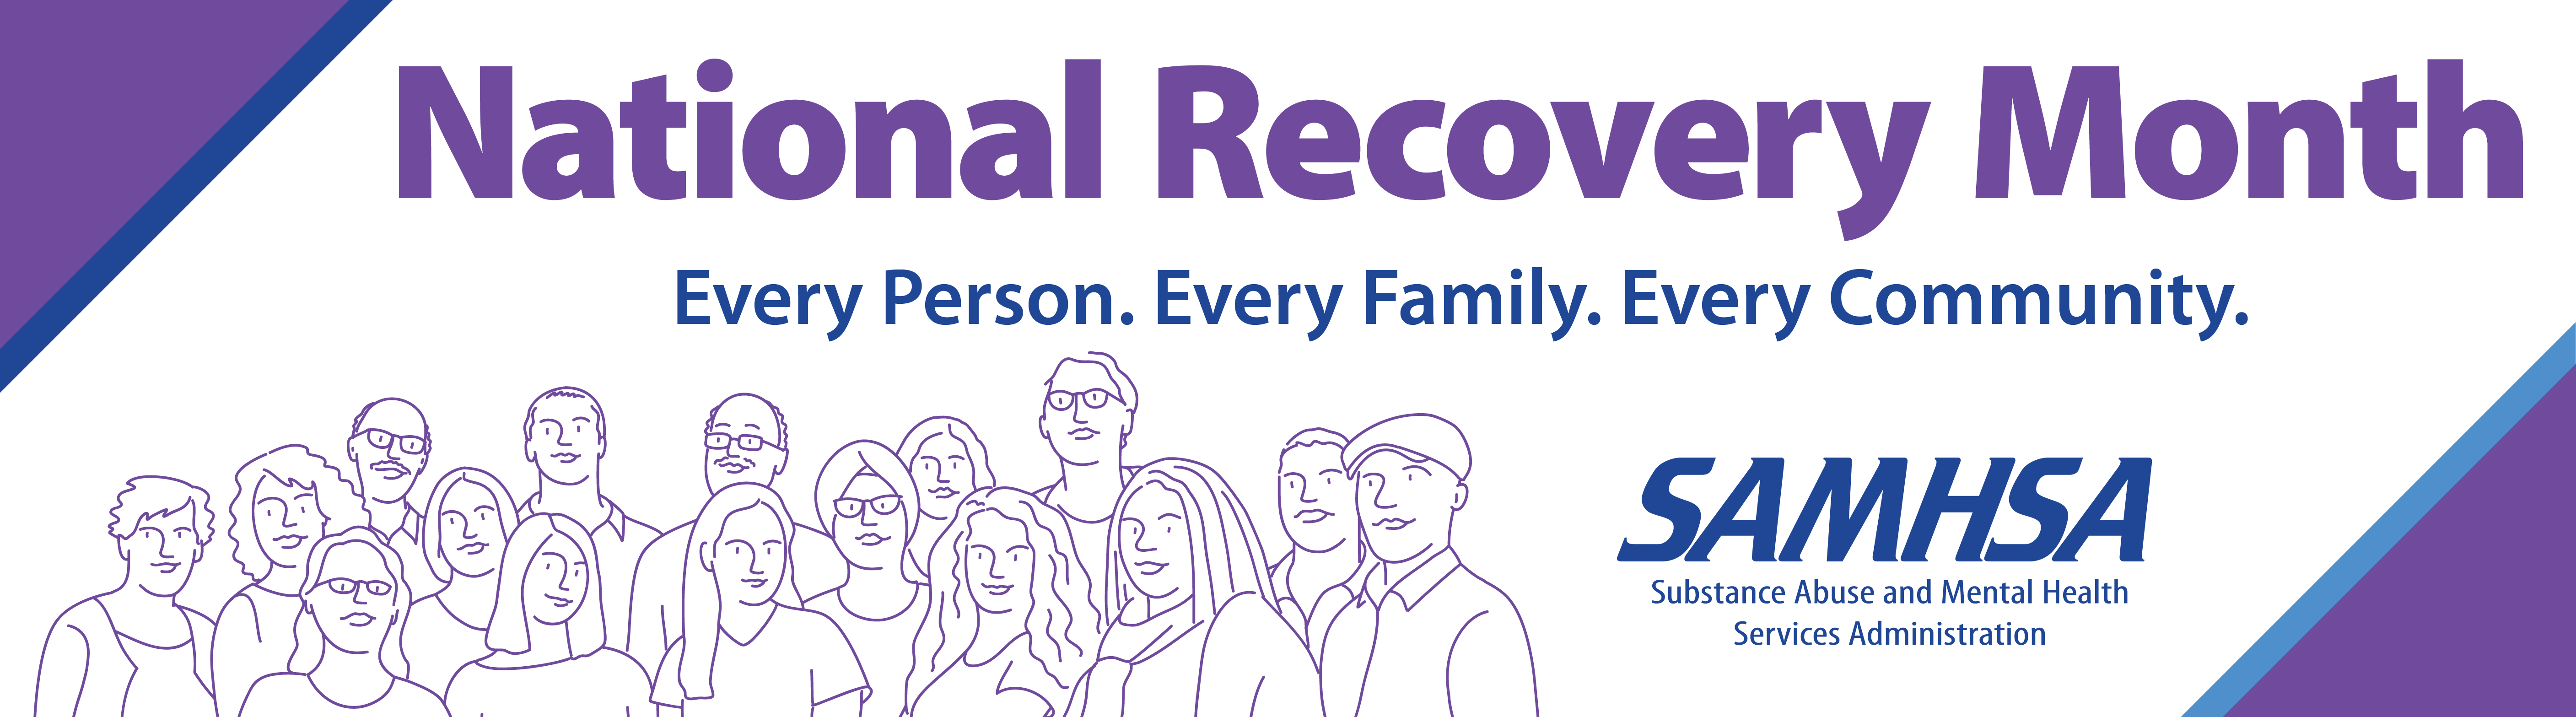 recovery month samhsa image